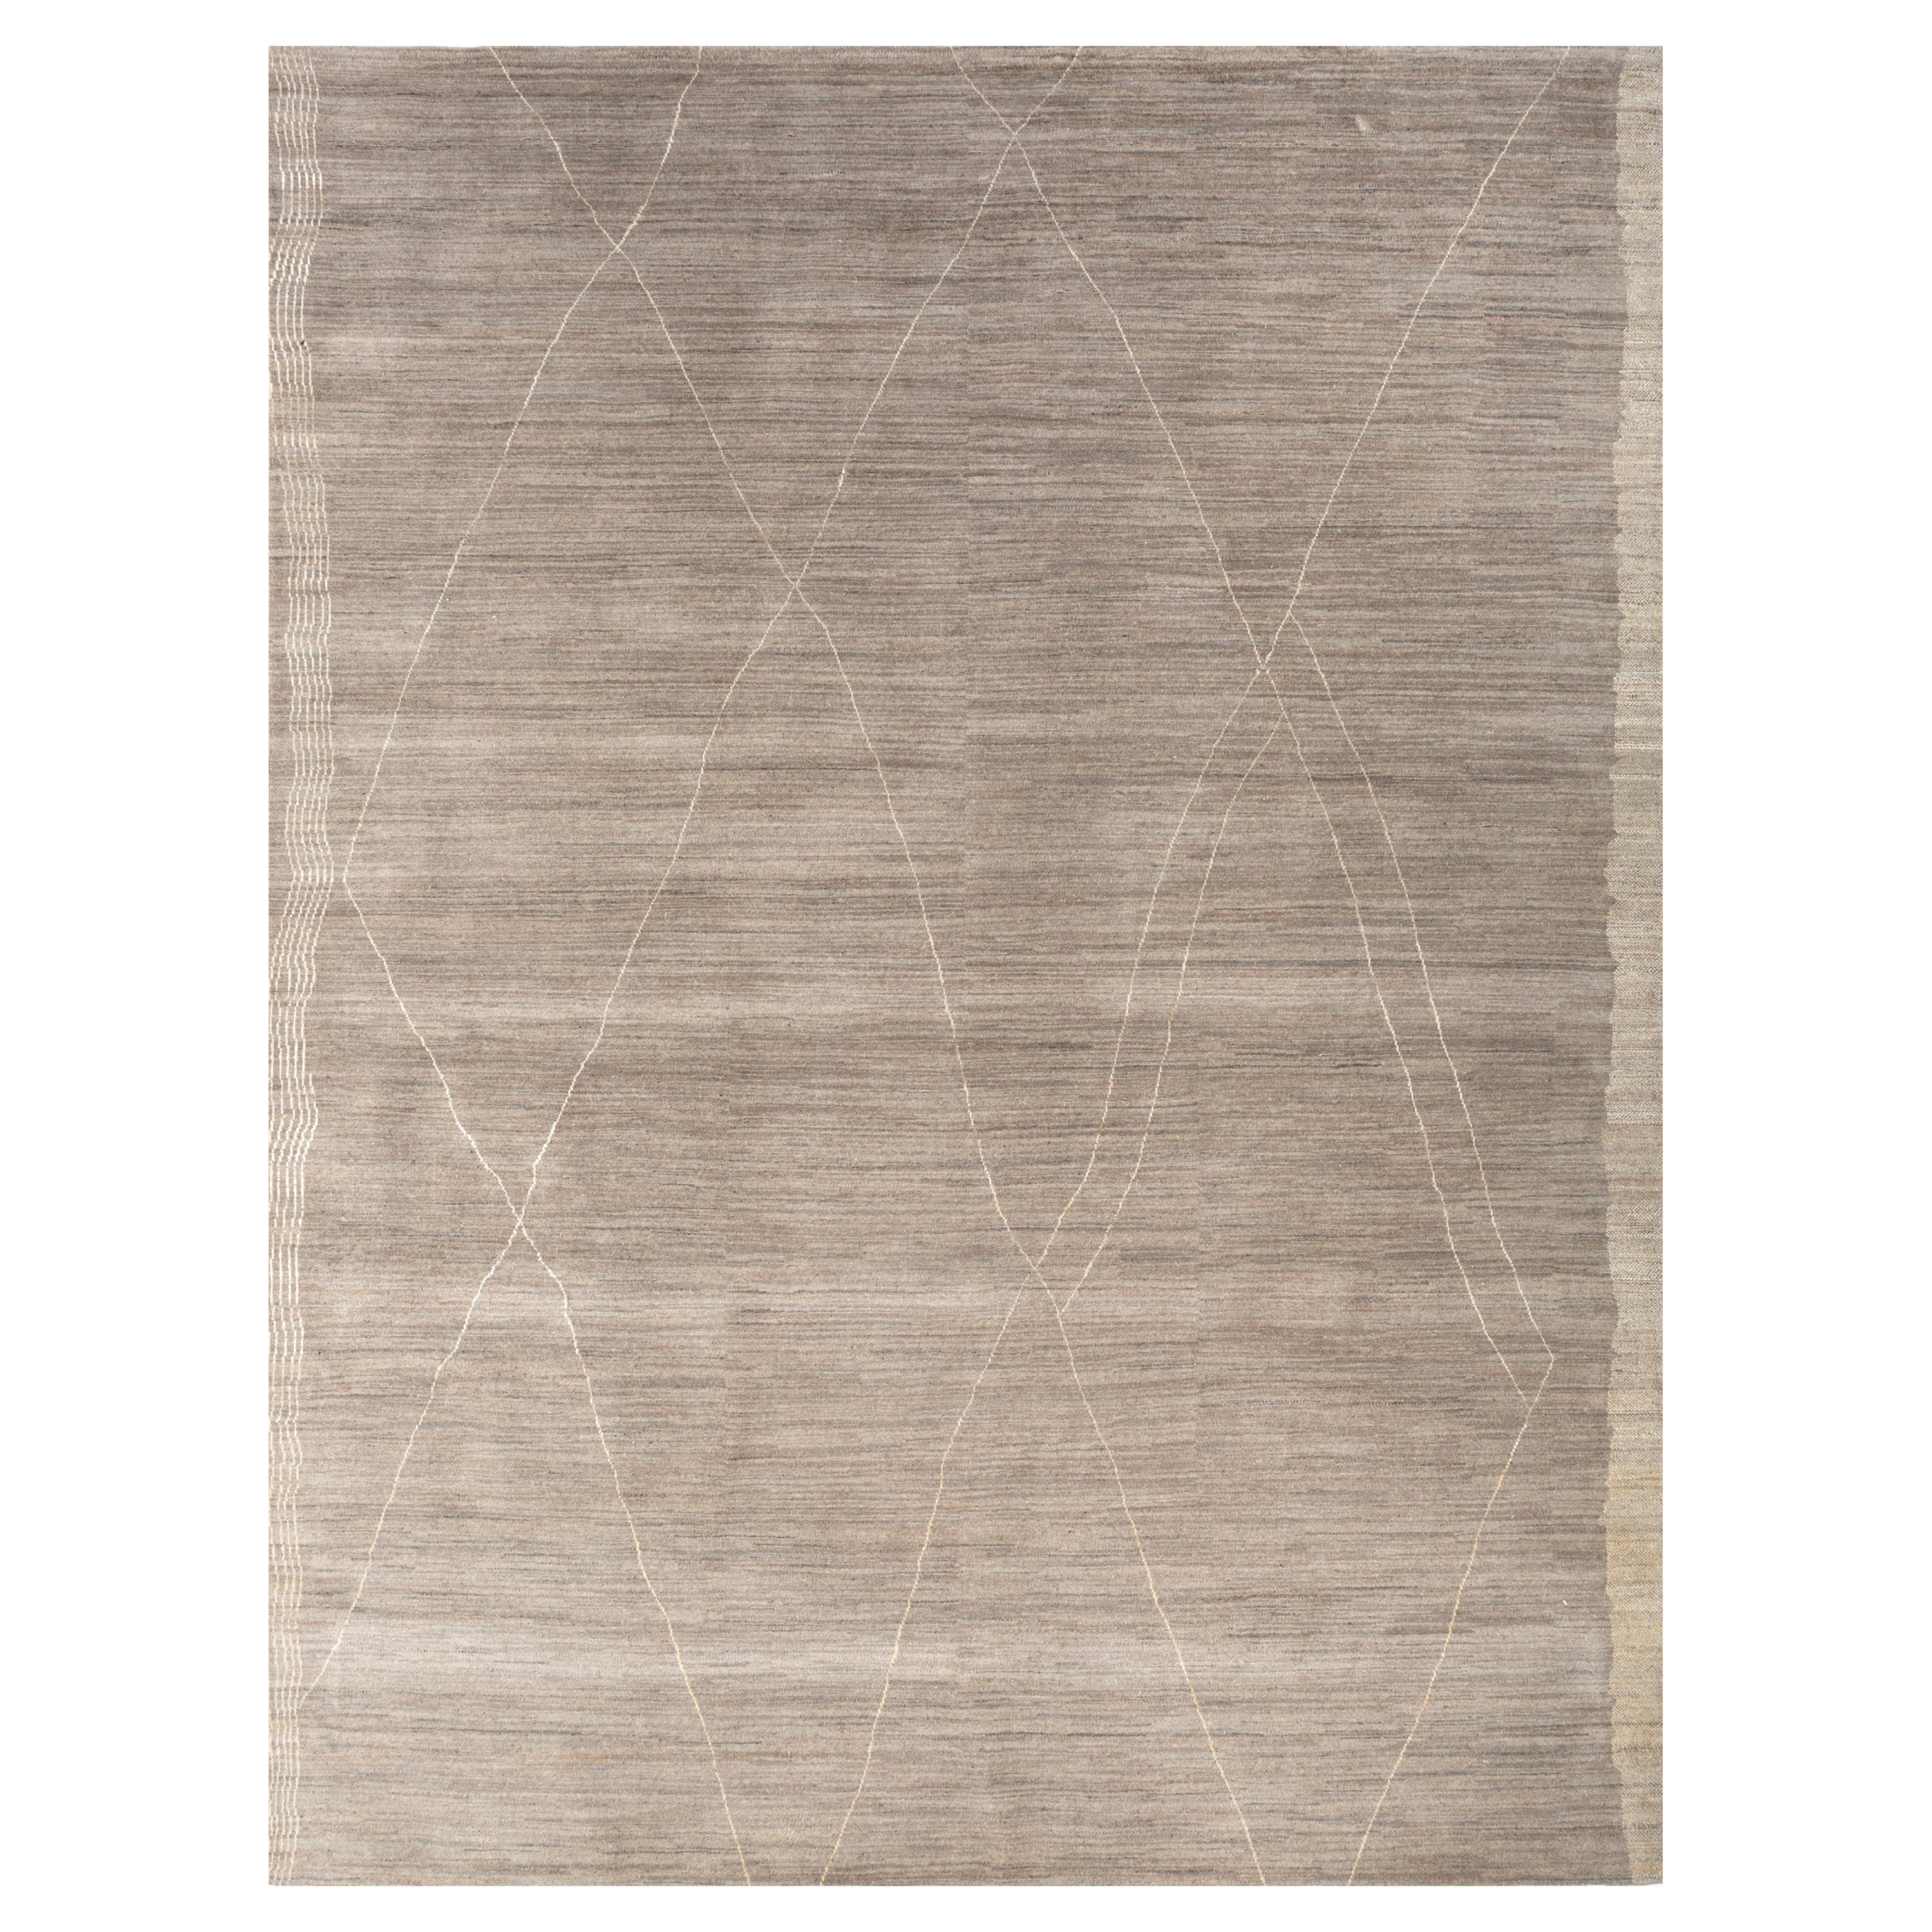 Natural Harmony Gray Hand-Knotted Rug